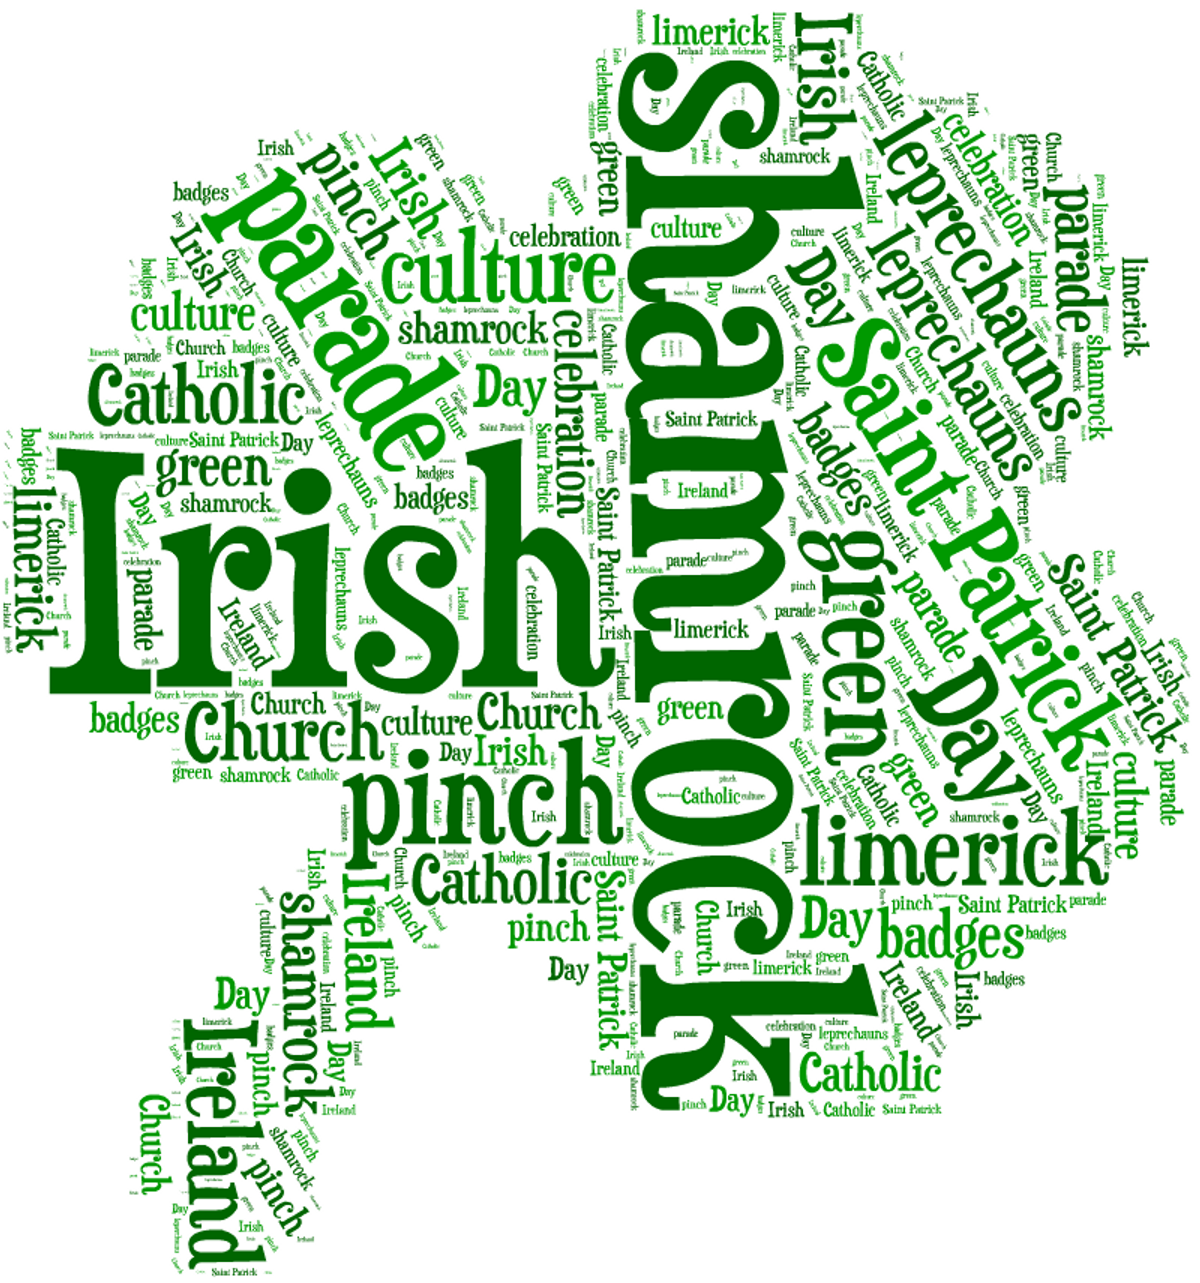 17 Irish Words And Phrases To Learn Before Saint Patrick's Day